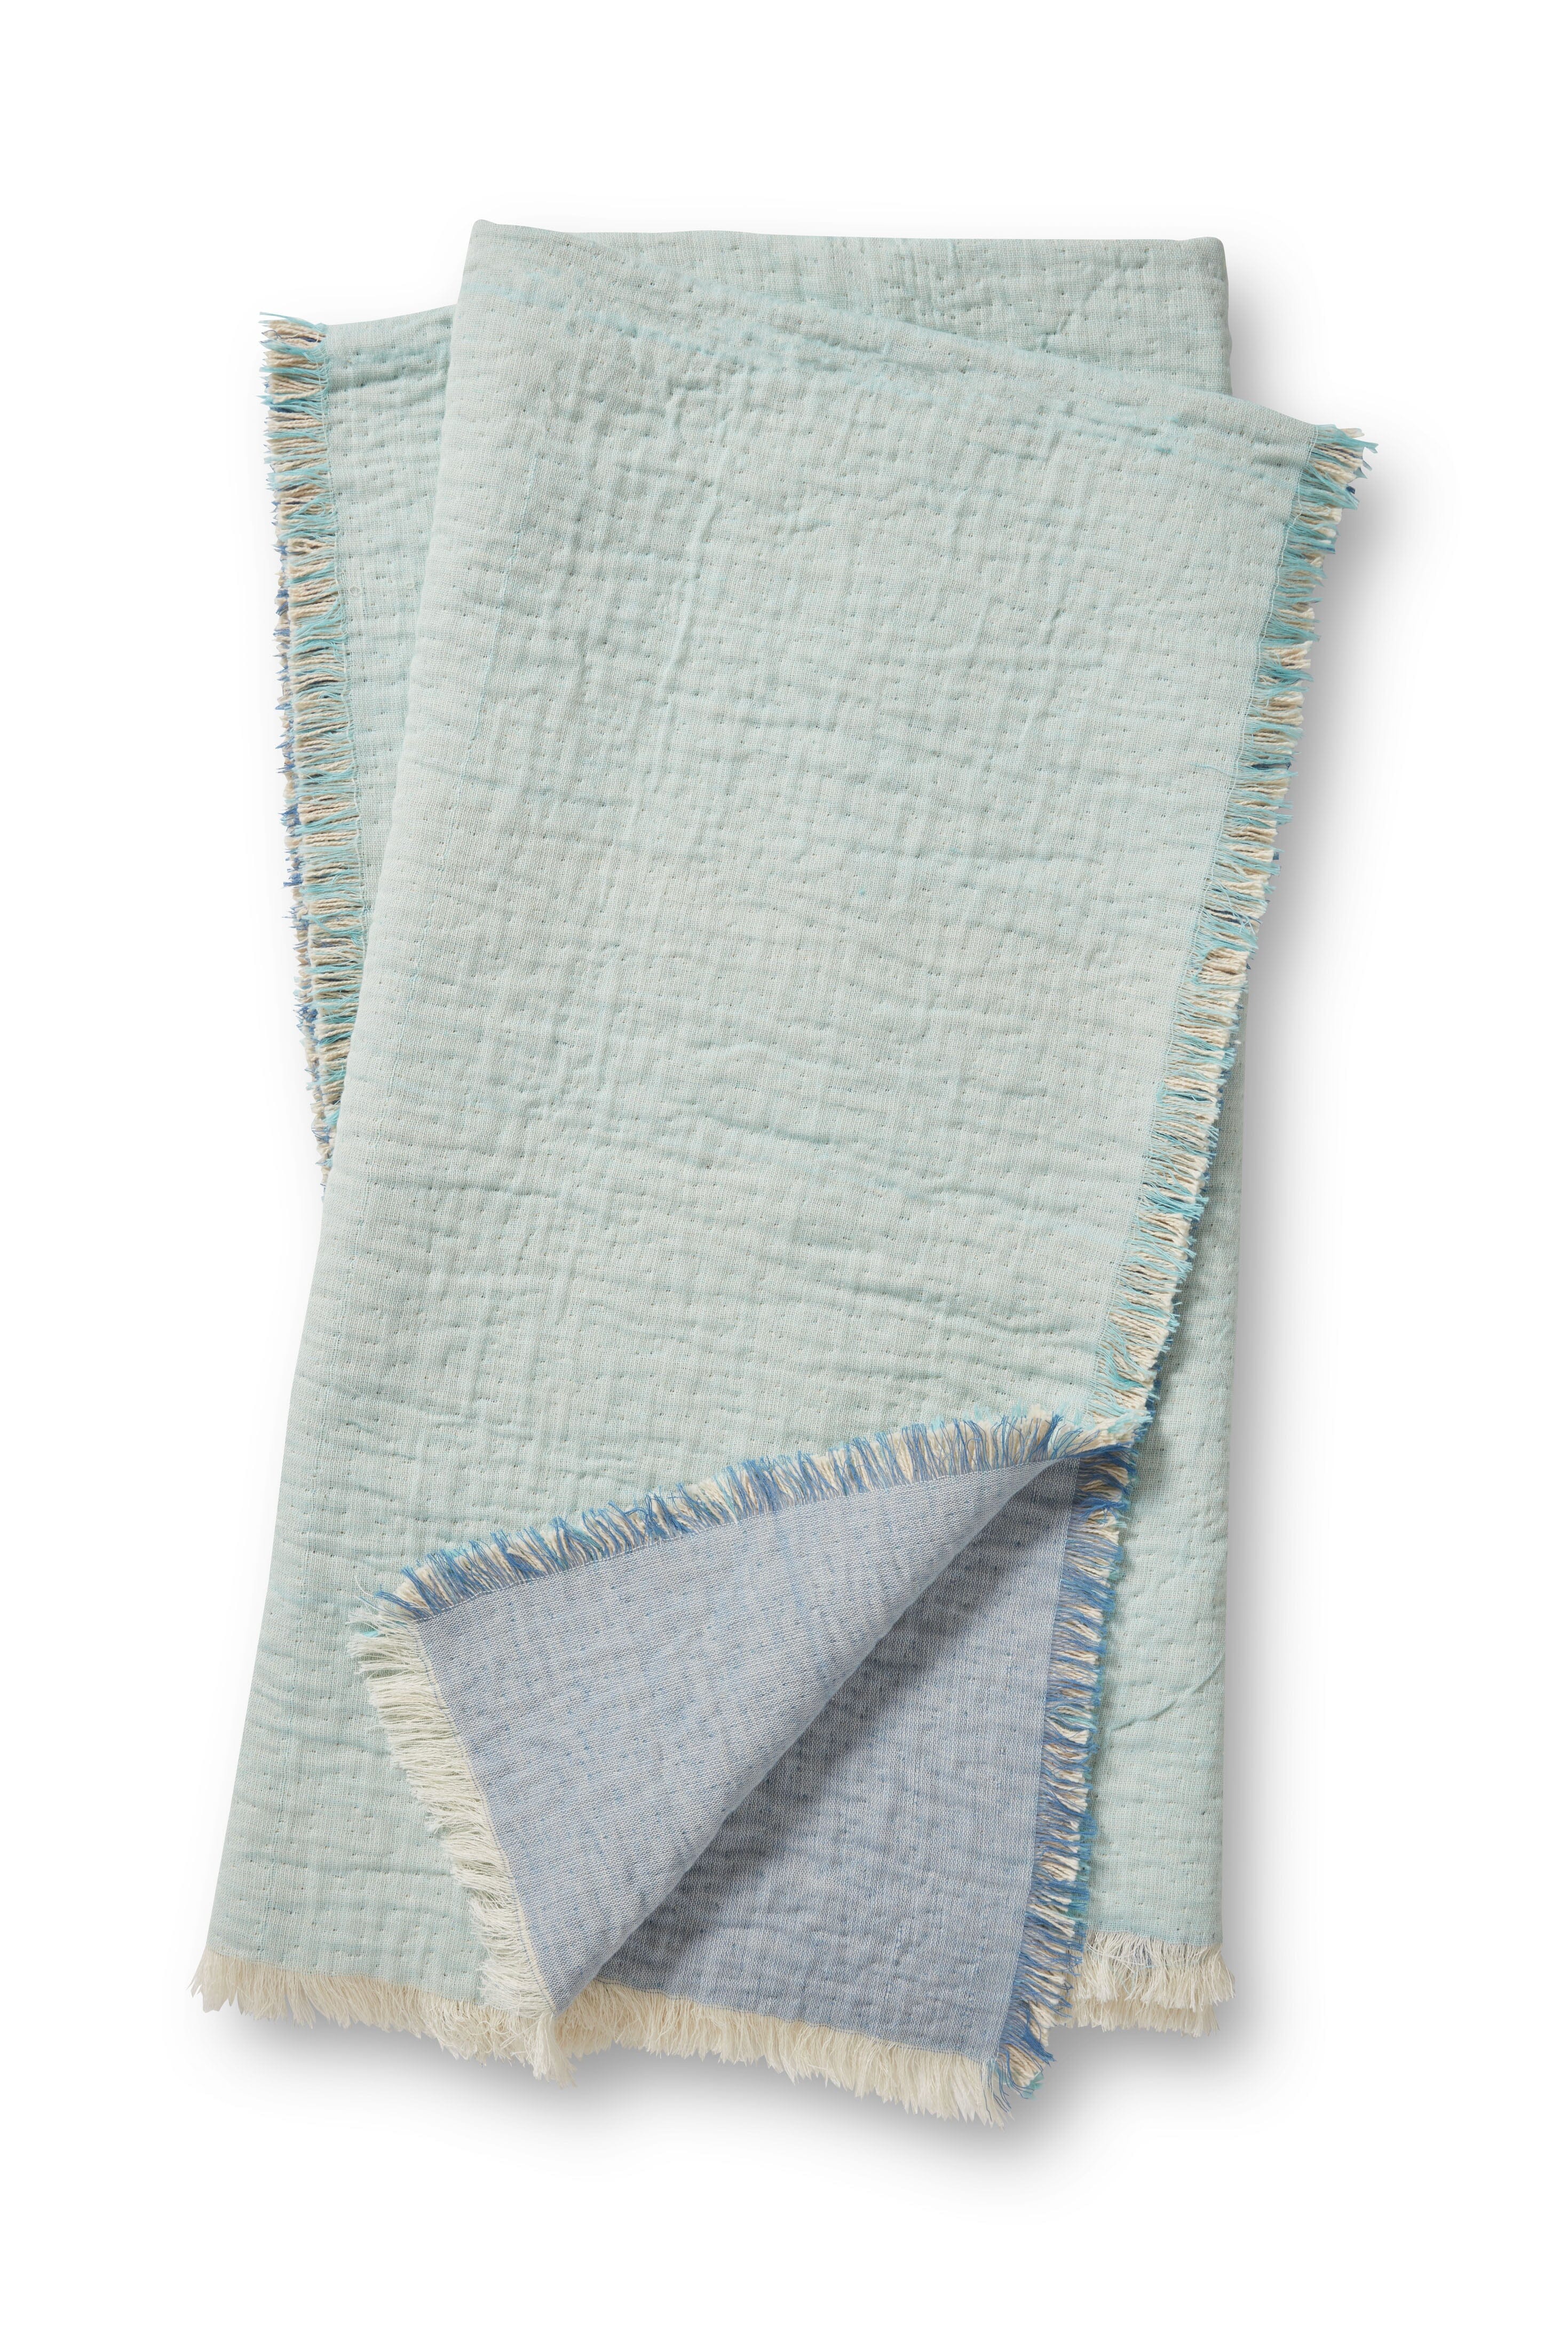 Magnolia Home by Joanna Gaines x Loloi Reed Throw | Aqua / Blue Magnolia Home by Joanna Gaines x Loloi